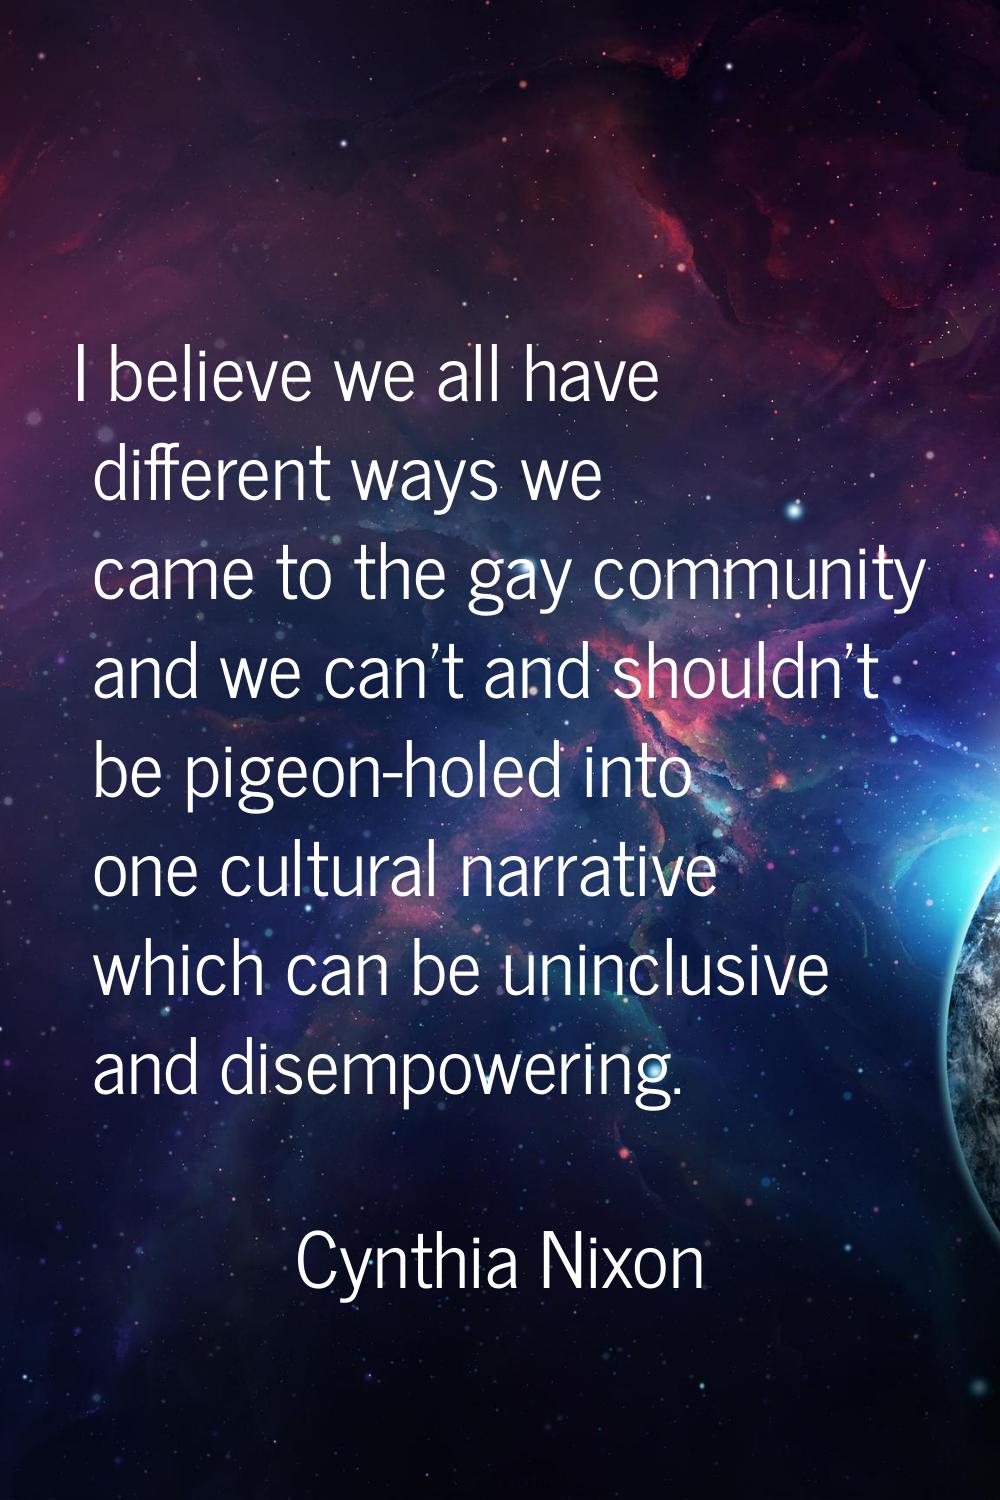 I believe we all have different ways we came to the gay community and we can't and shouldn't be pig